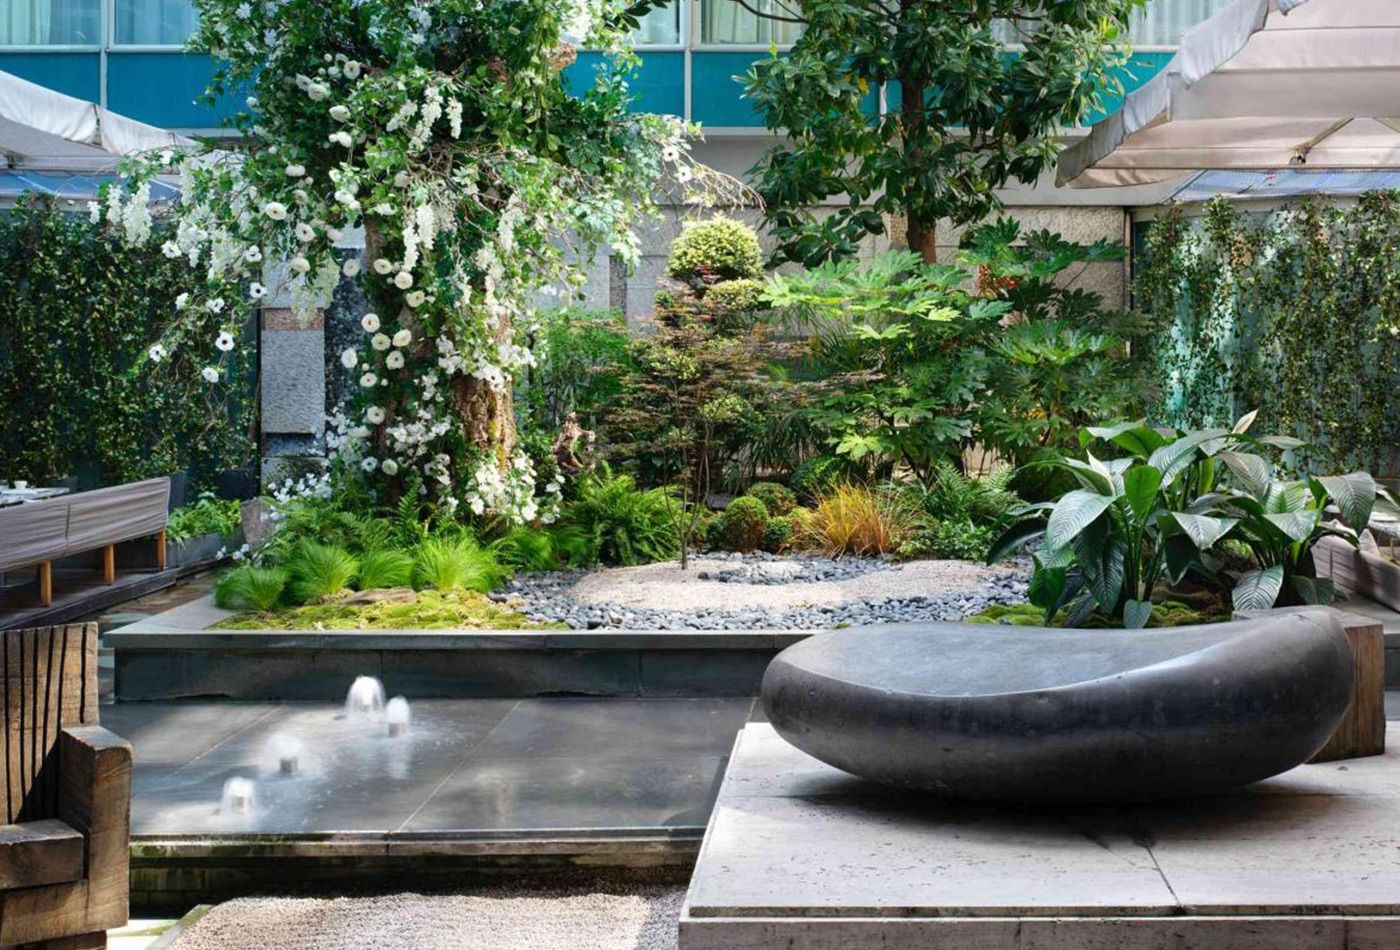 Outdoor marble water feature and greenery